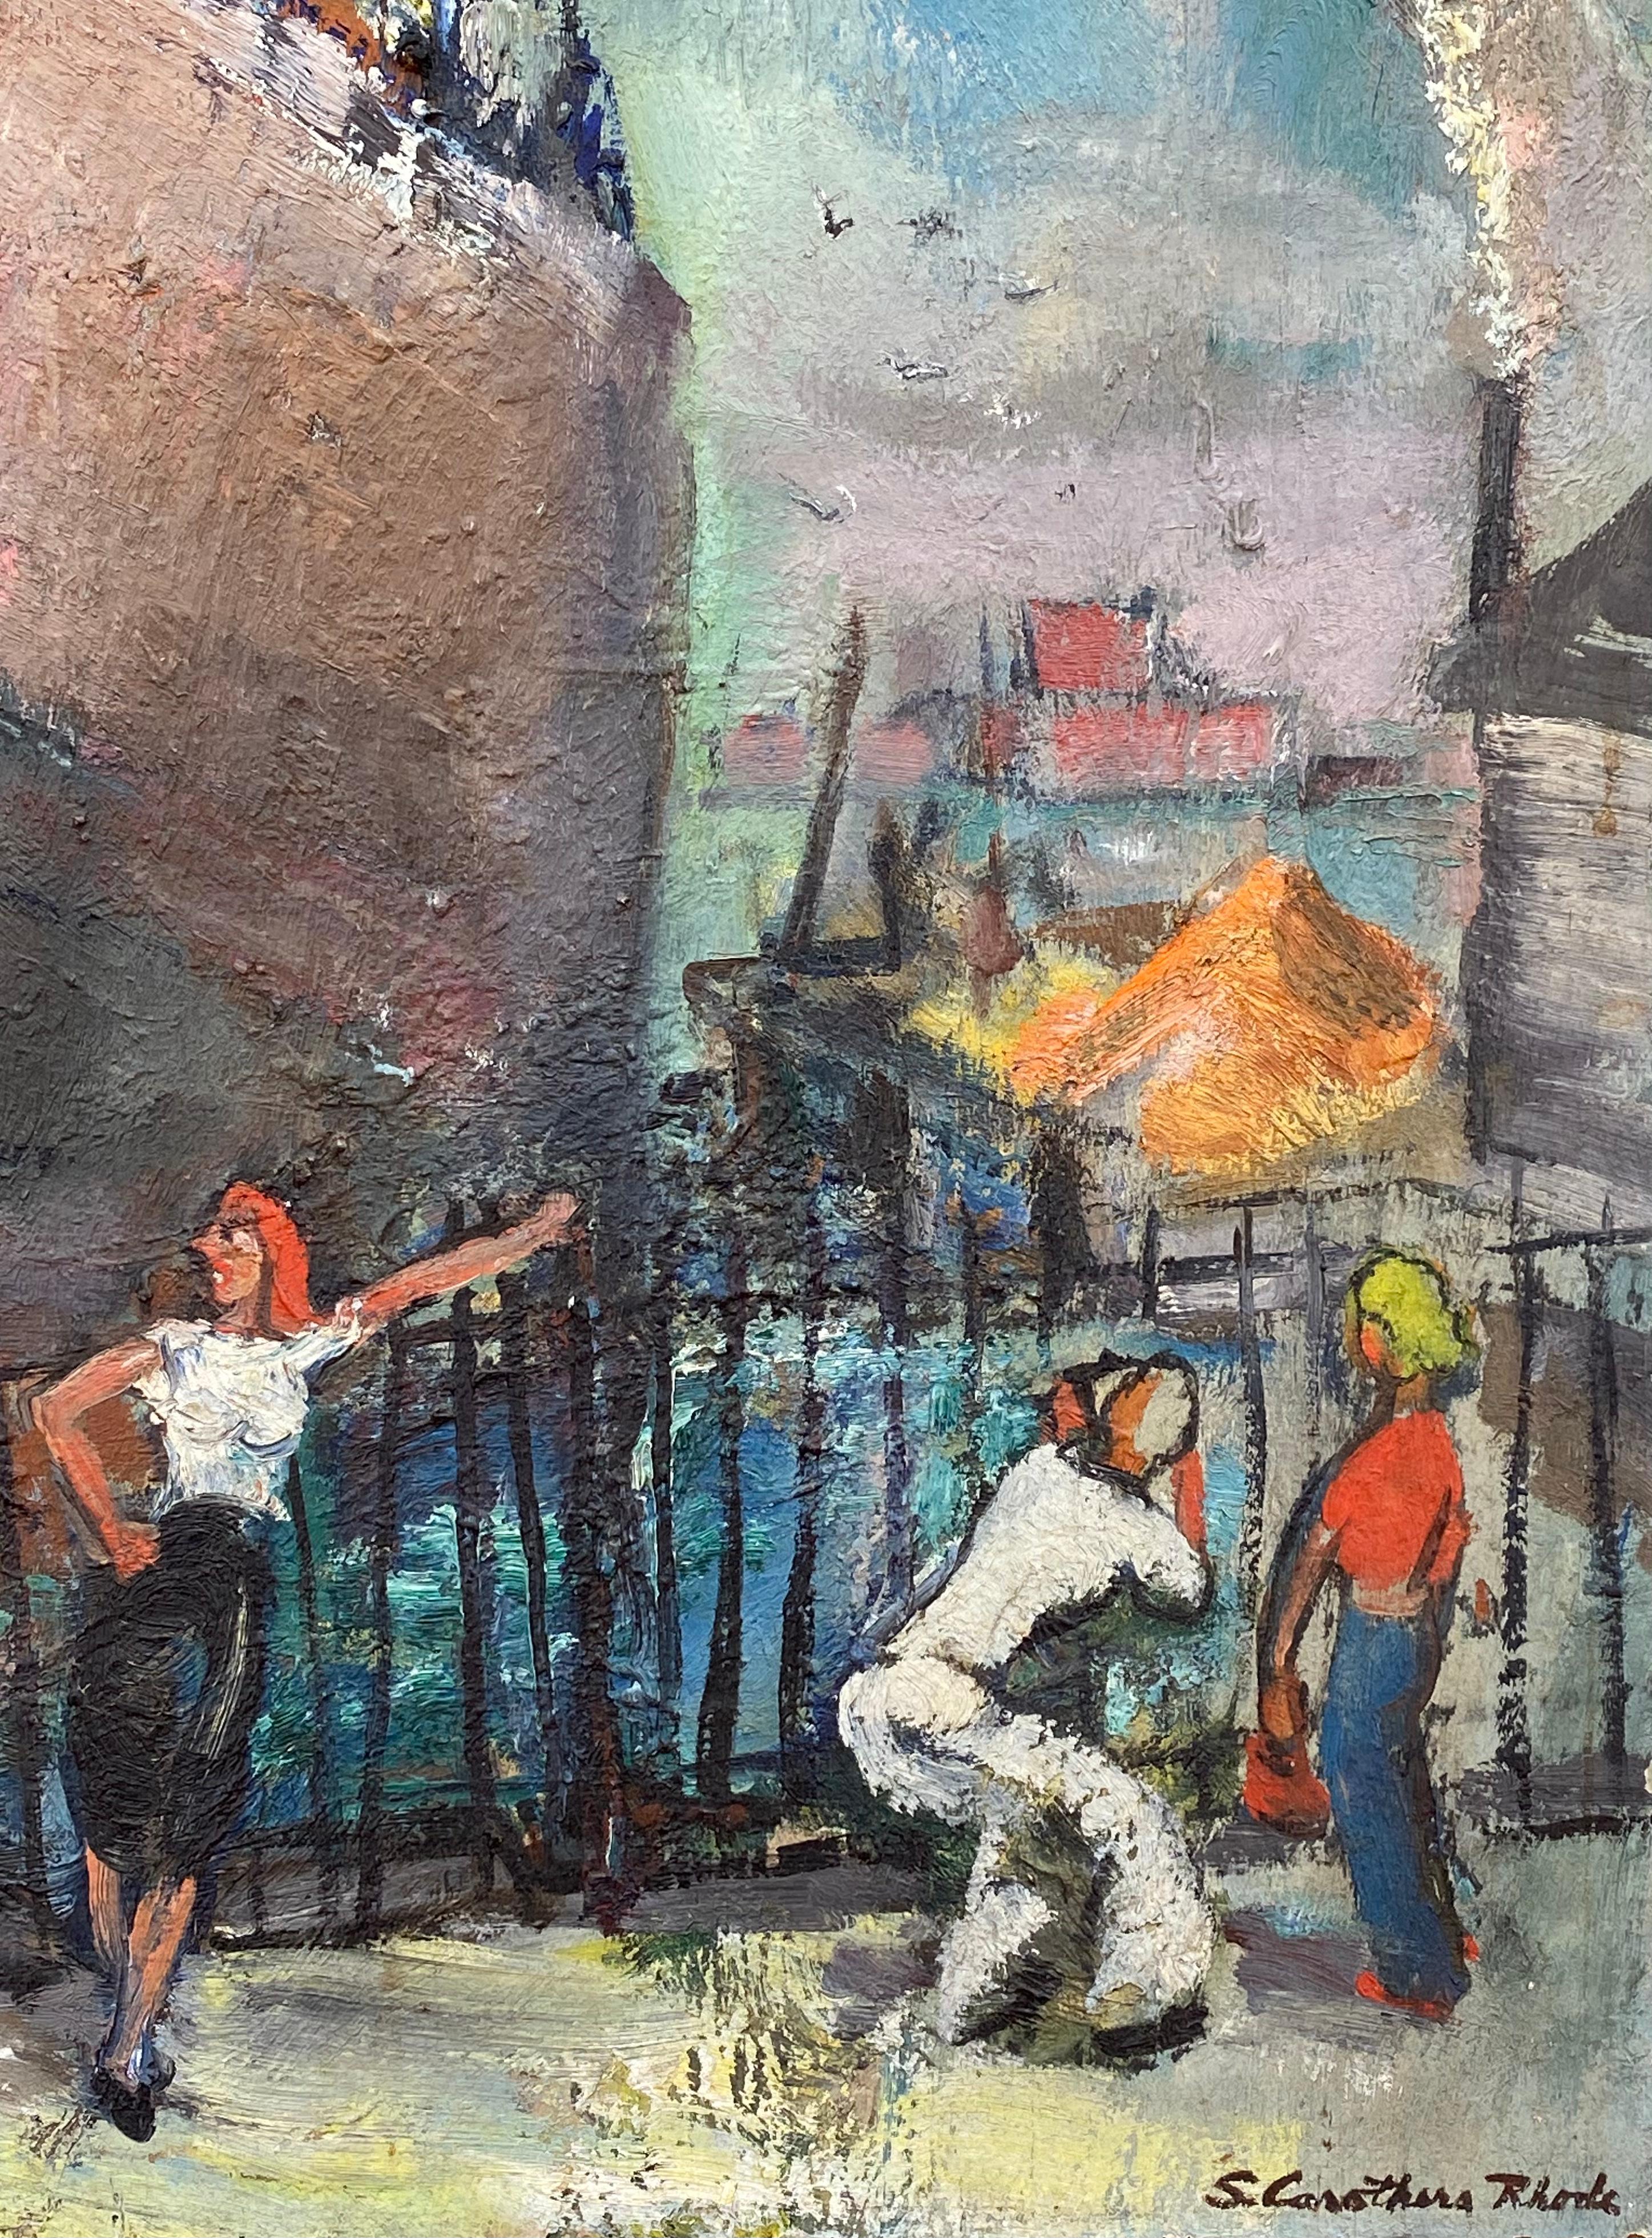 Original oil on masonite painting of Fleet Week with sailors flirting with young women on the dock by the American artist, Sarah Pace Carothers Rhode. Signed lower right. Circa 1945. Condition is very good. Newly framed in a contemporary gold